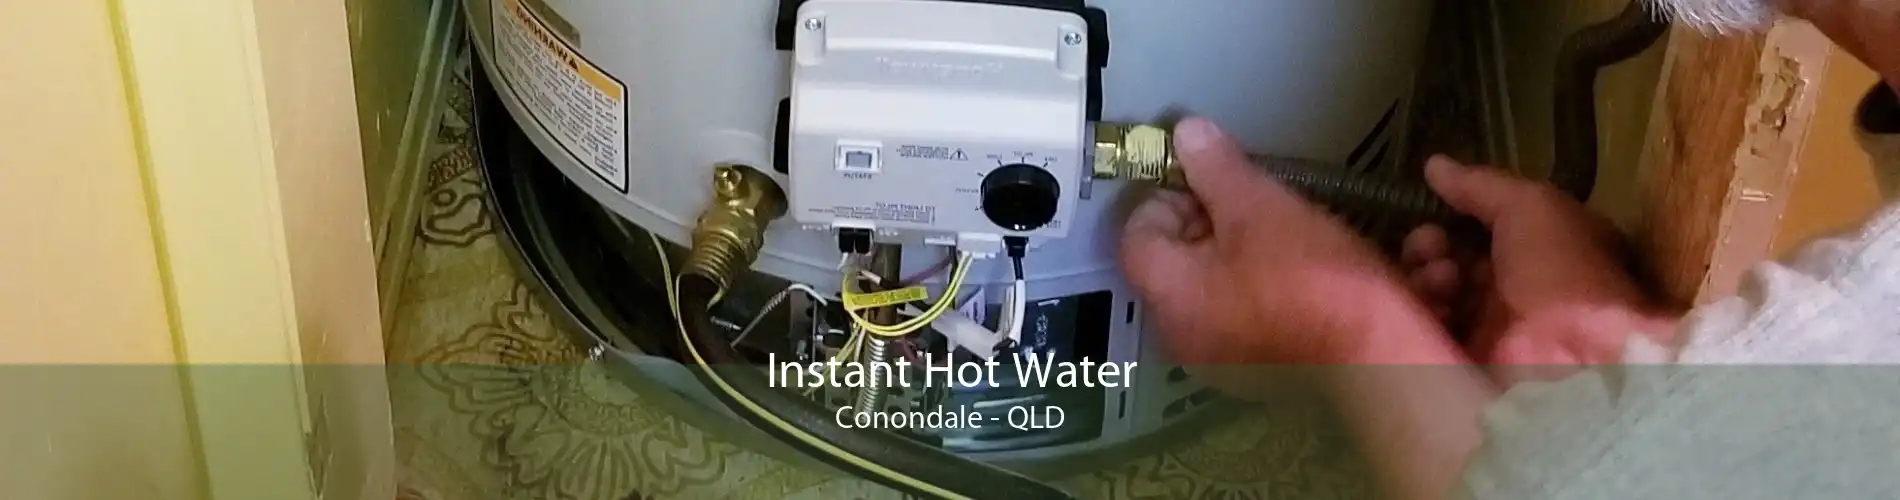 Instant Hot Water Conondale - QLD